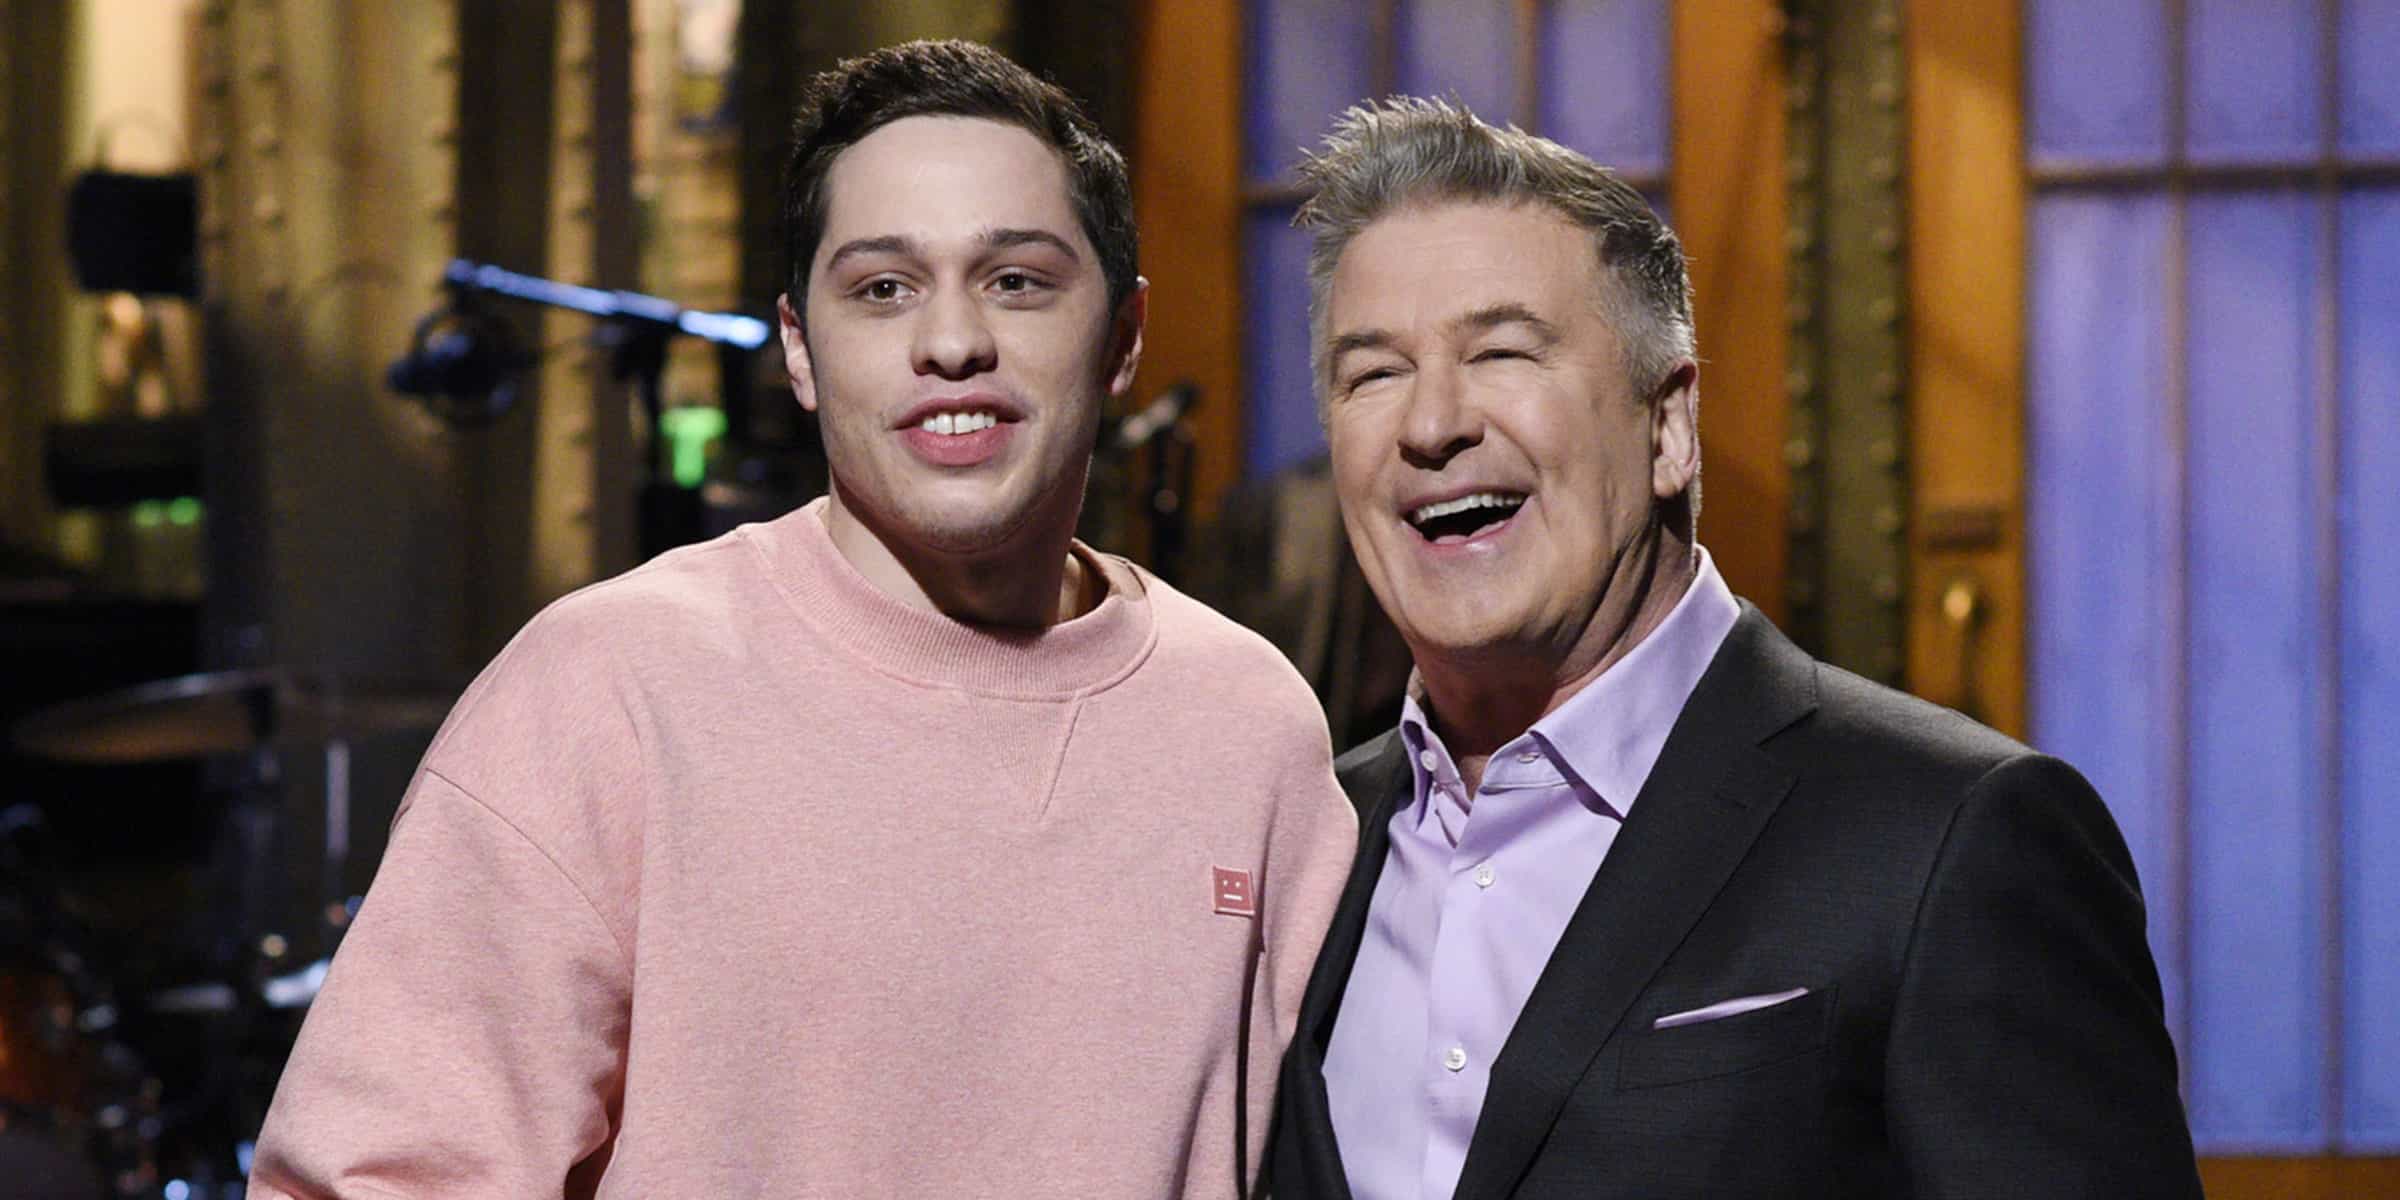 Alec Baldwin and Pete Davidson together for SNL (Credits: NBC)